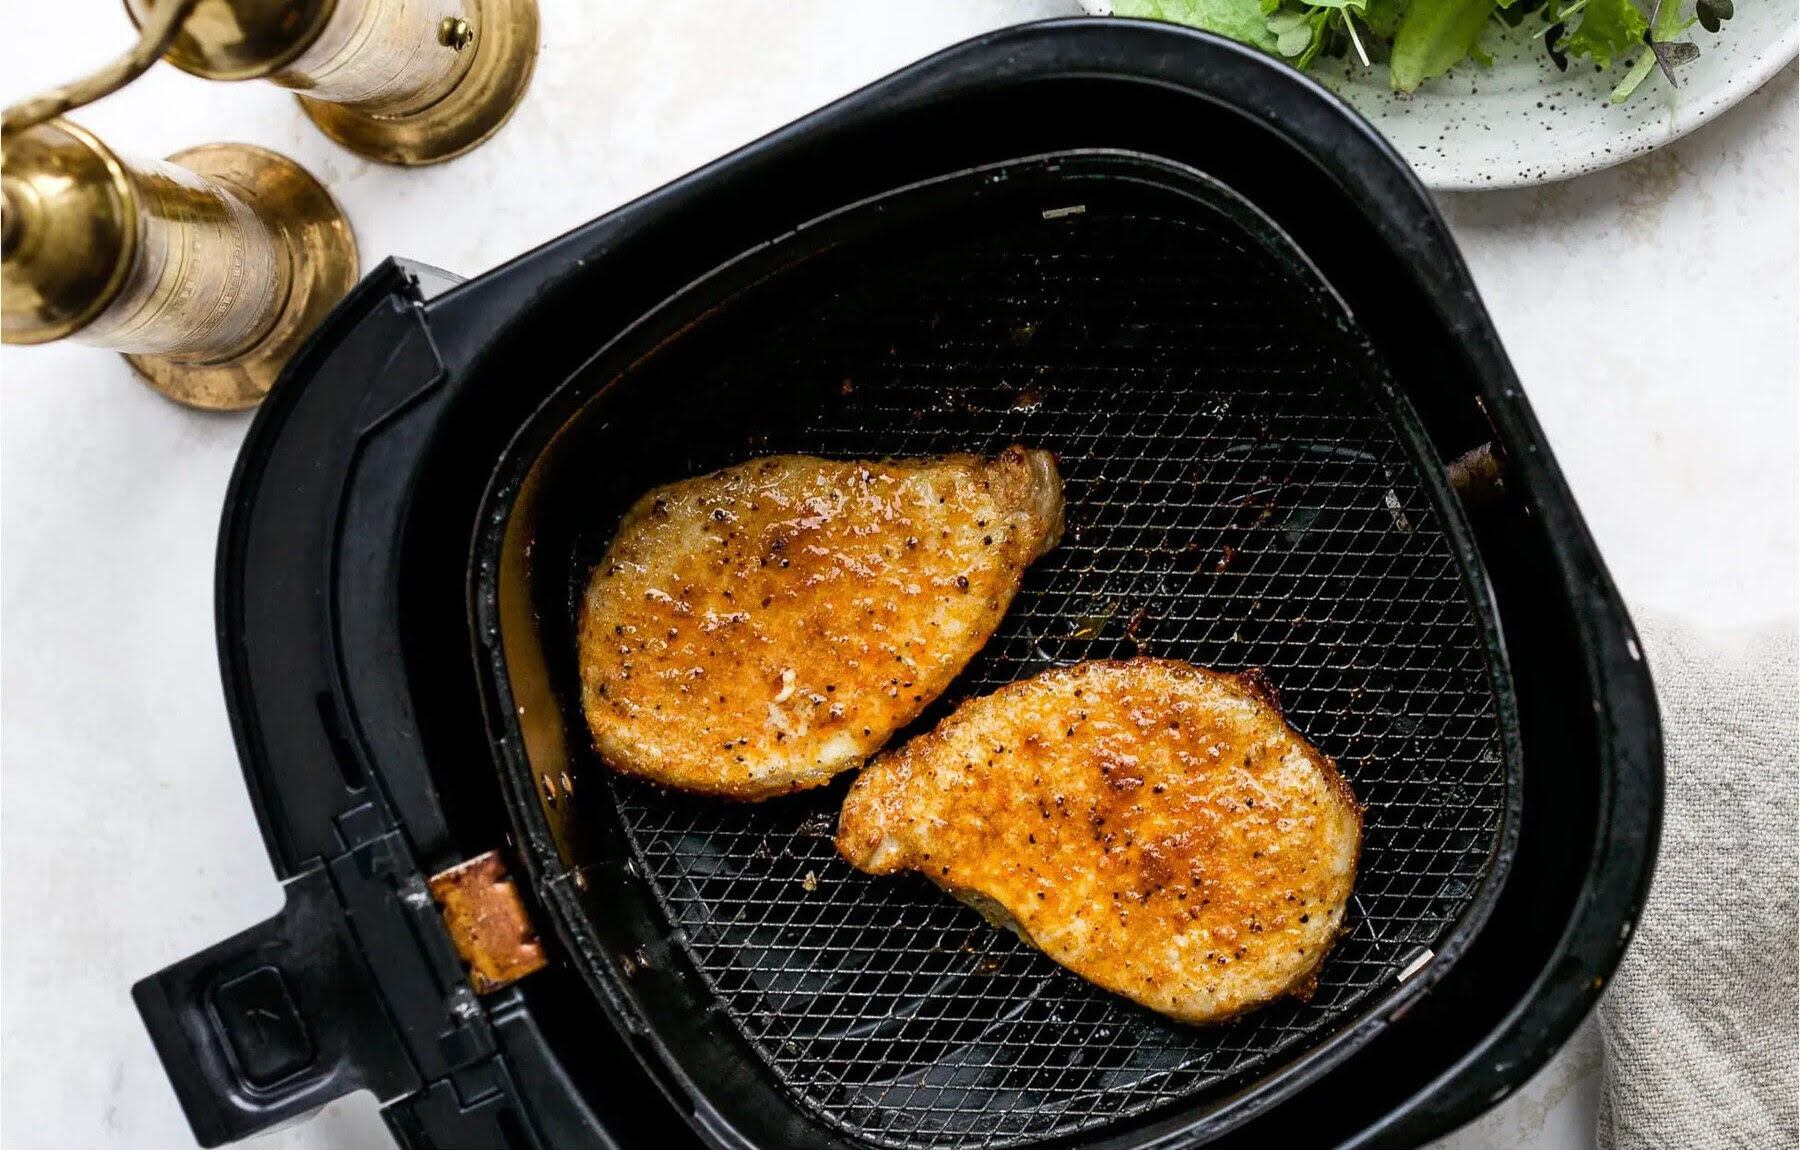 How Long To Cook Pork Chops In An Air Fryer